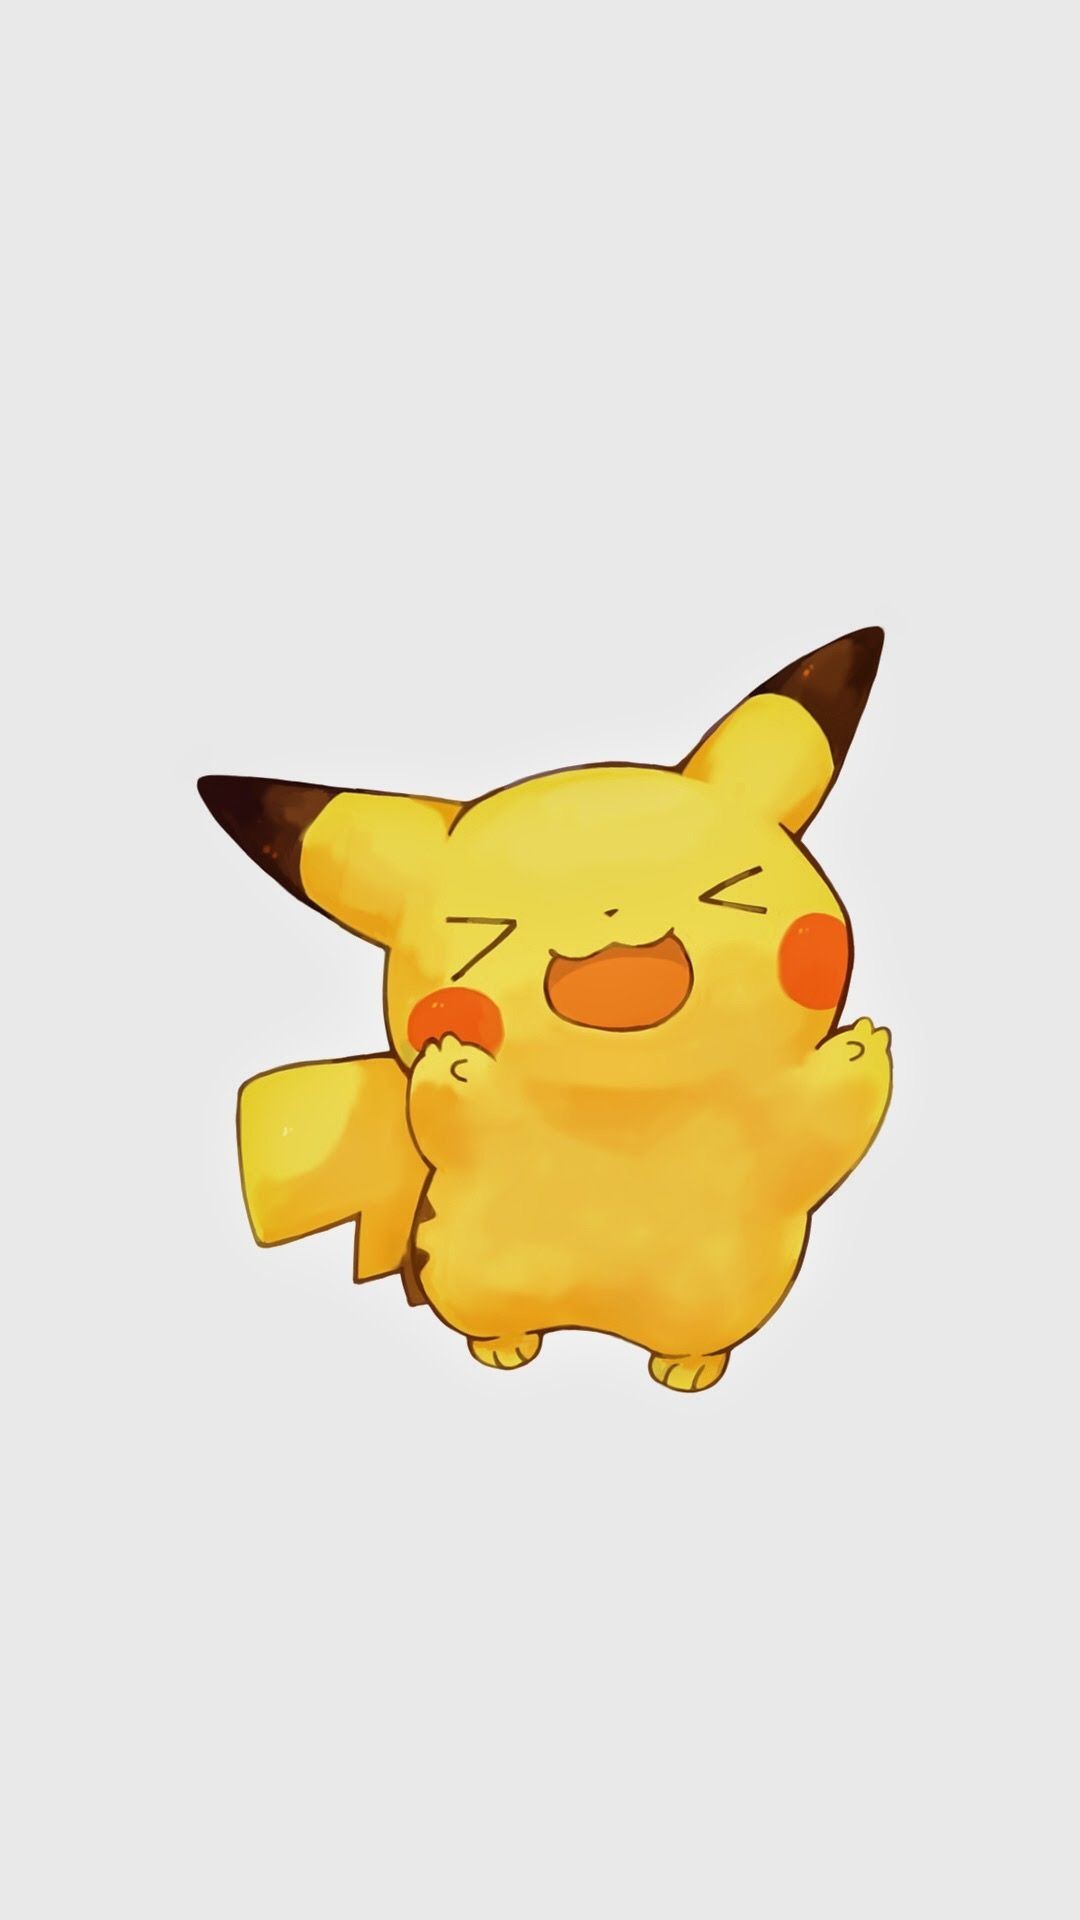 1080x1920  Tap image for more funny cute Pikachu wallpaper! Pikachu -  @mobile9 | Wallpapers